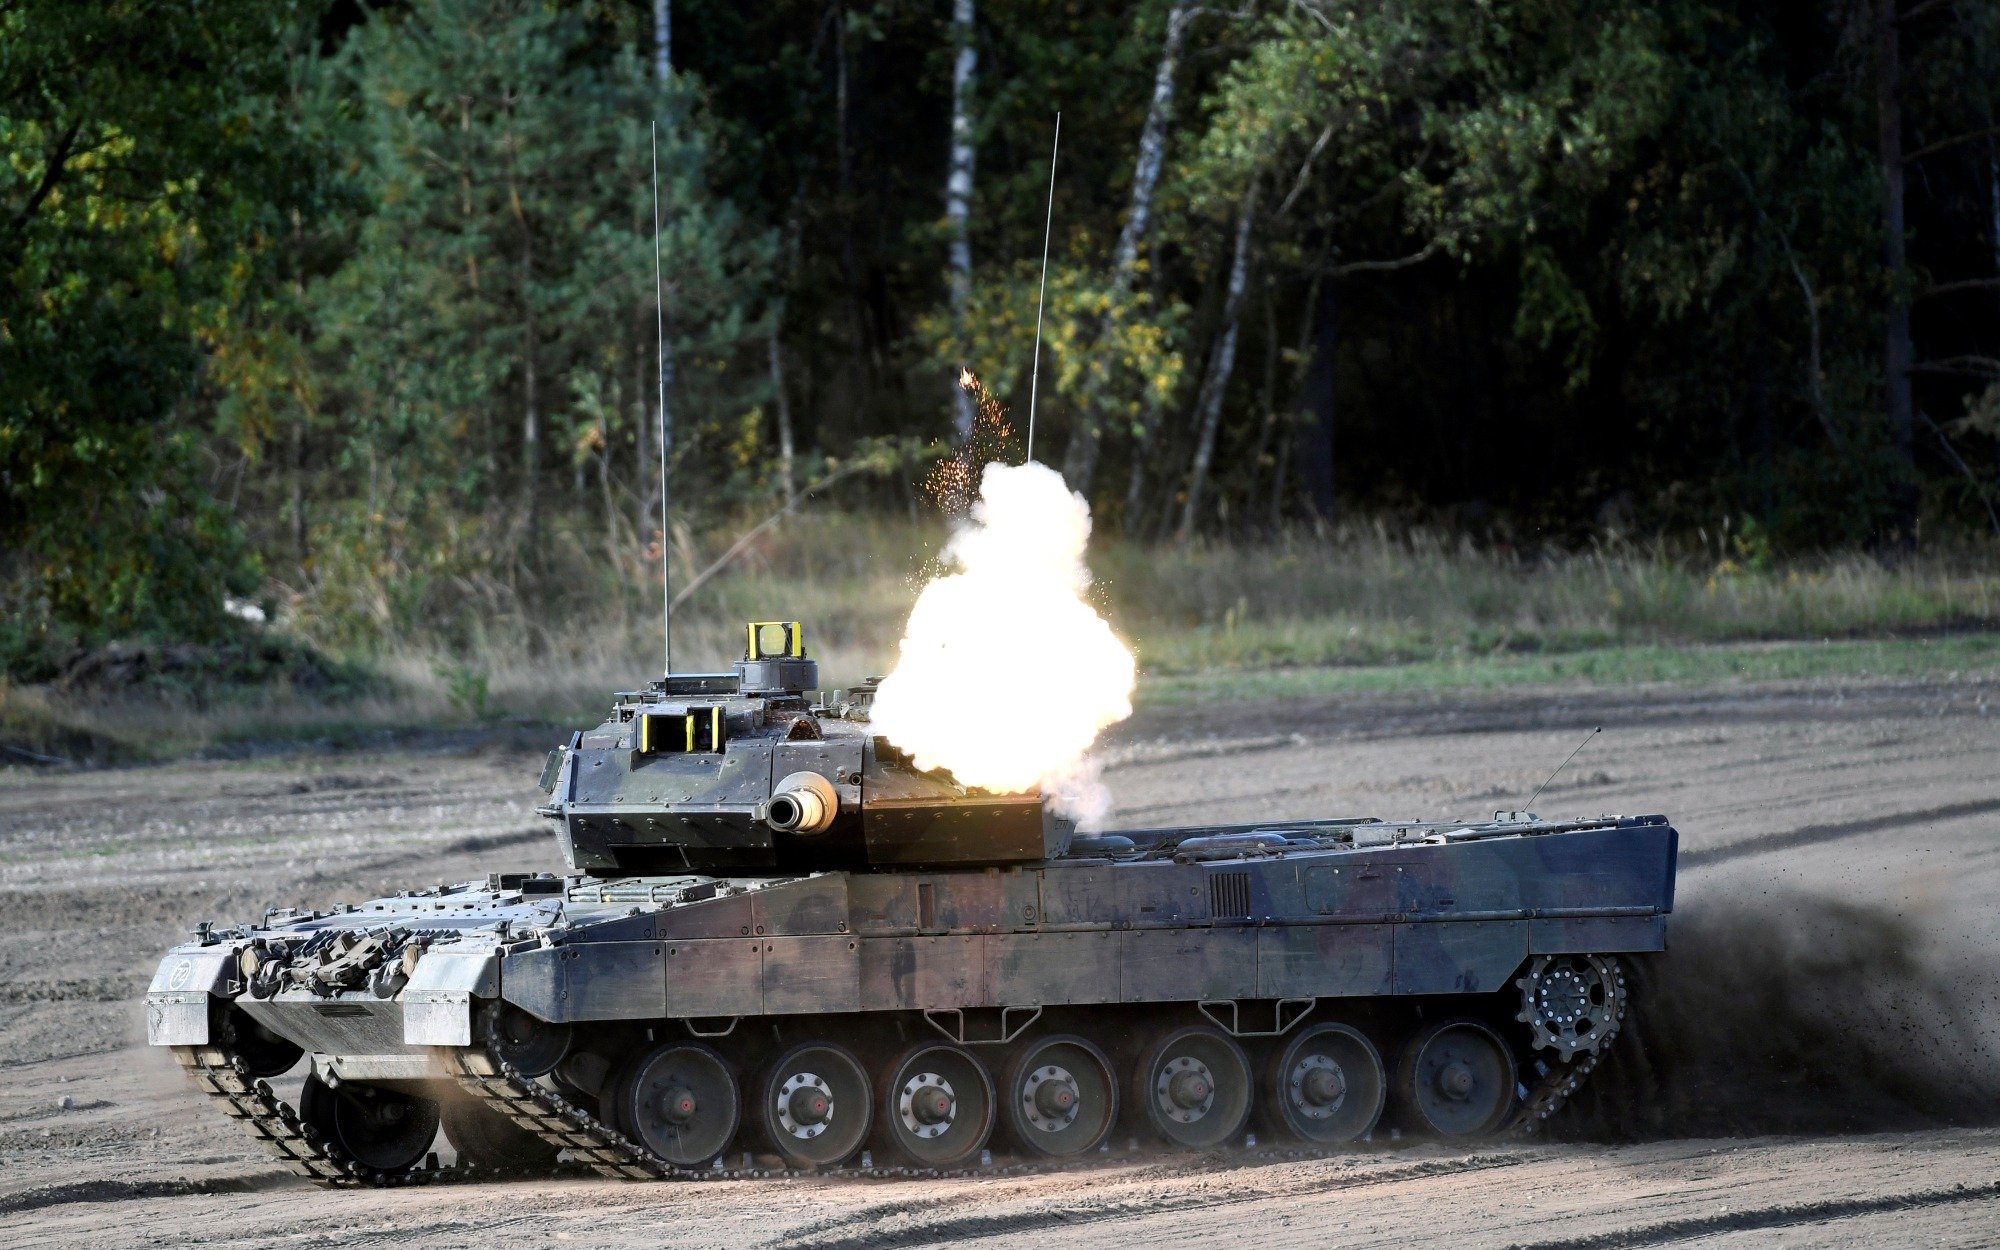 Leopard 2 Tank from NATO